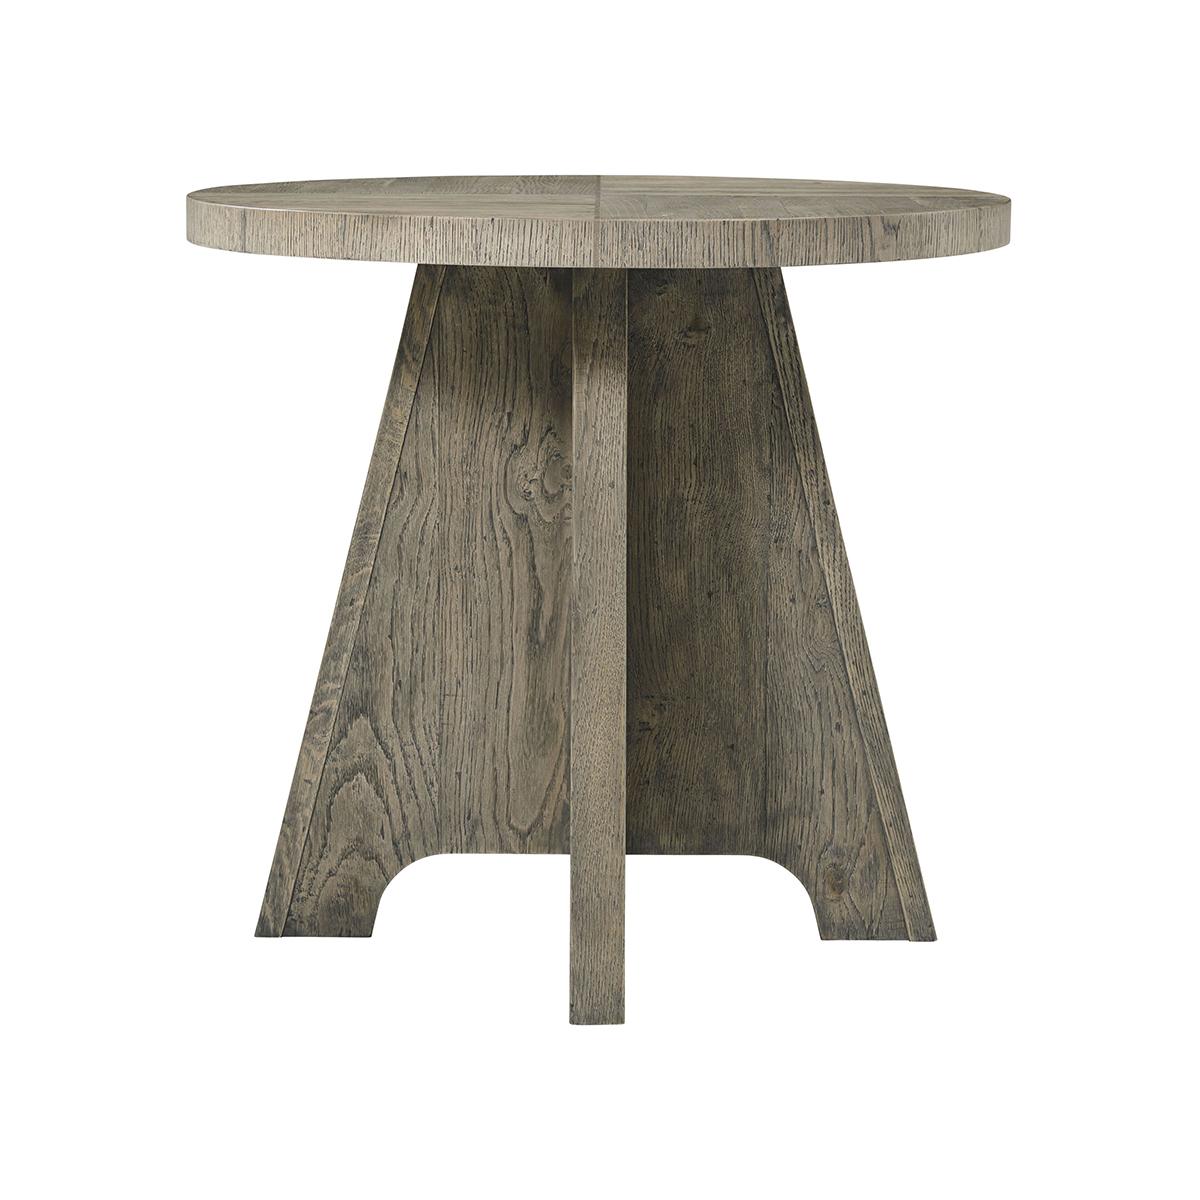 Vietnamese Country Rustic Greyed Oak Side Table For Sale